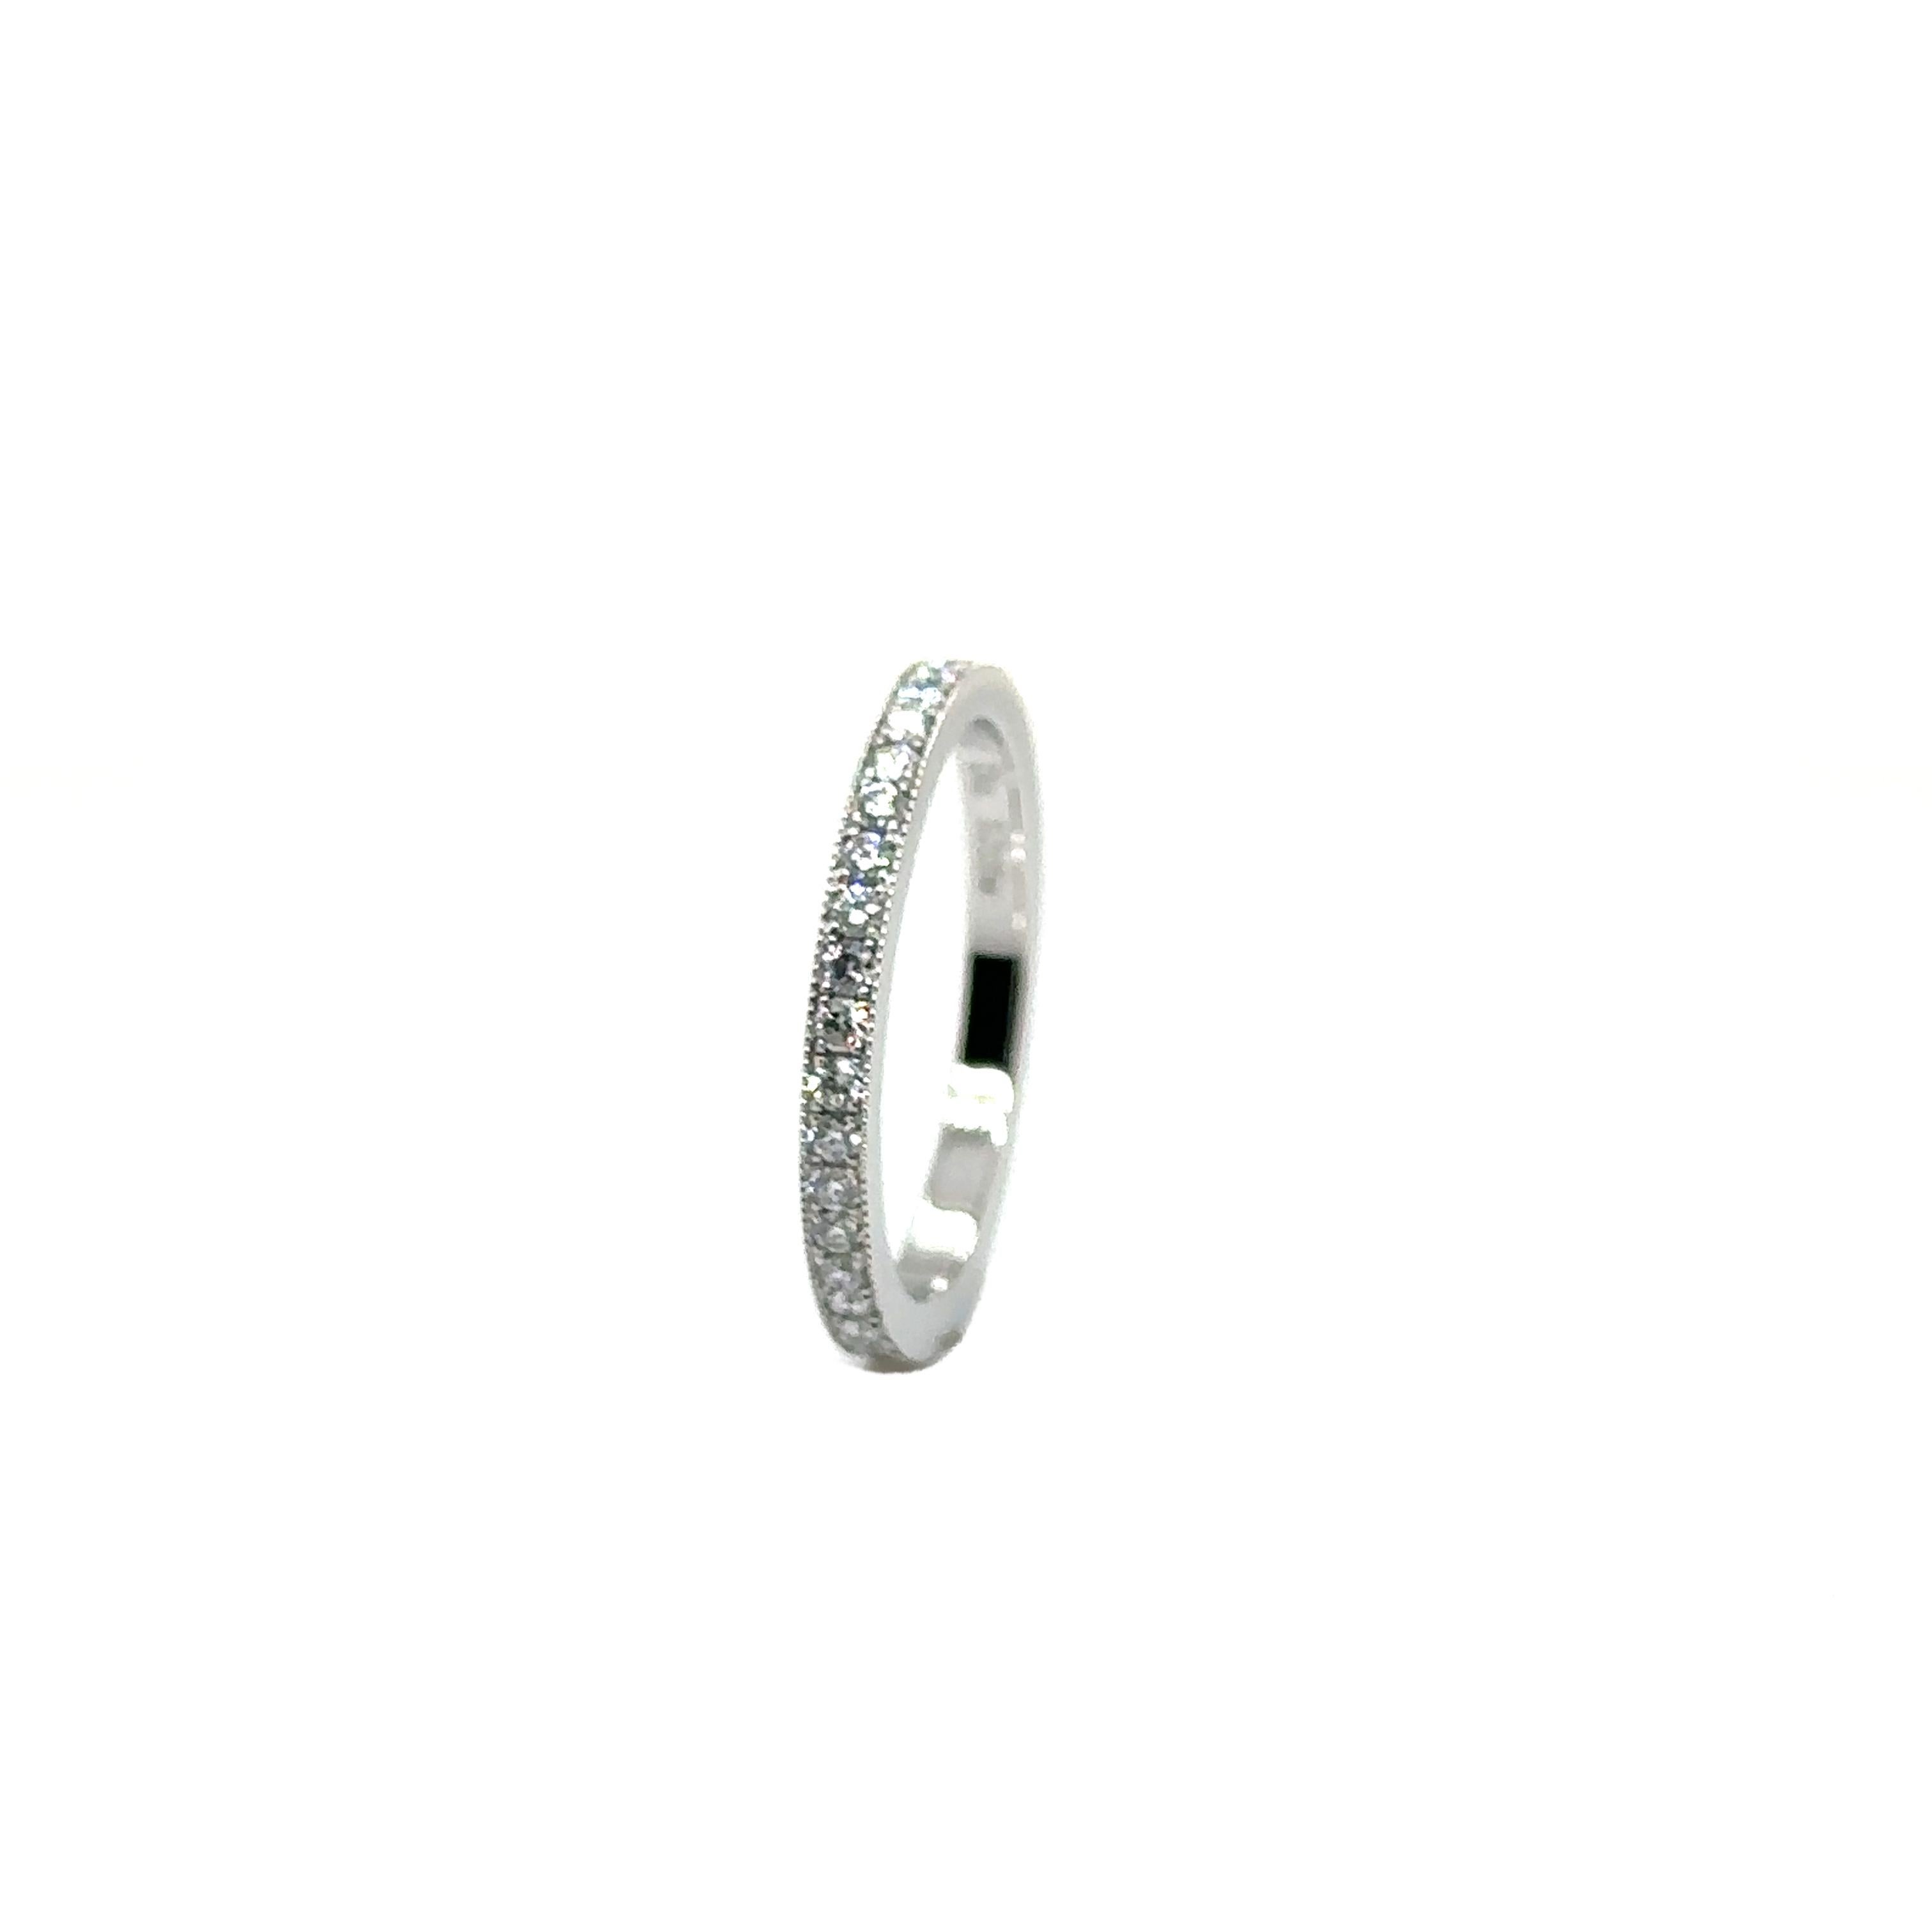 Modern WB-39-PLAT - PLATINUM WEDDING BAND with 0.52 CT DIAMONDS For Sale